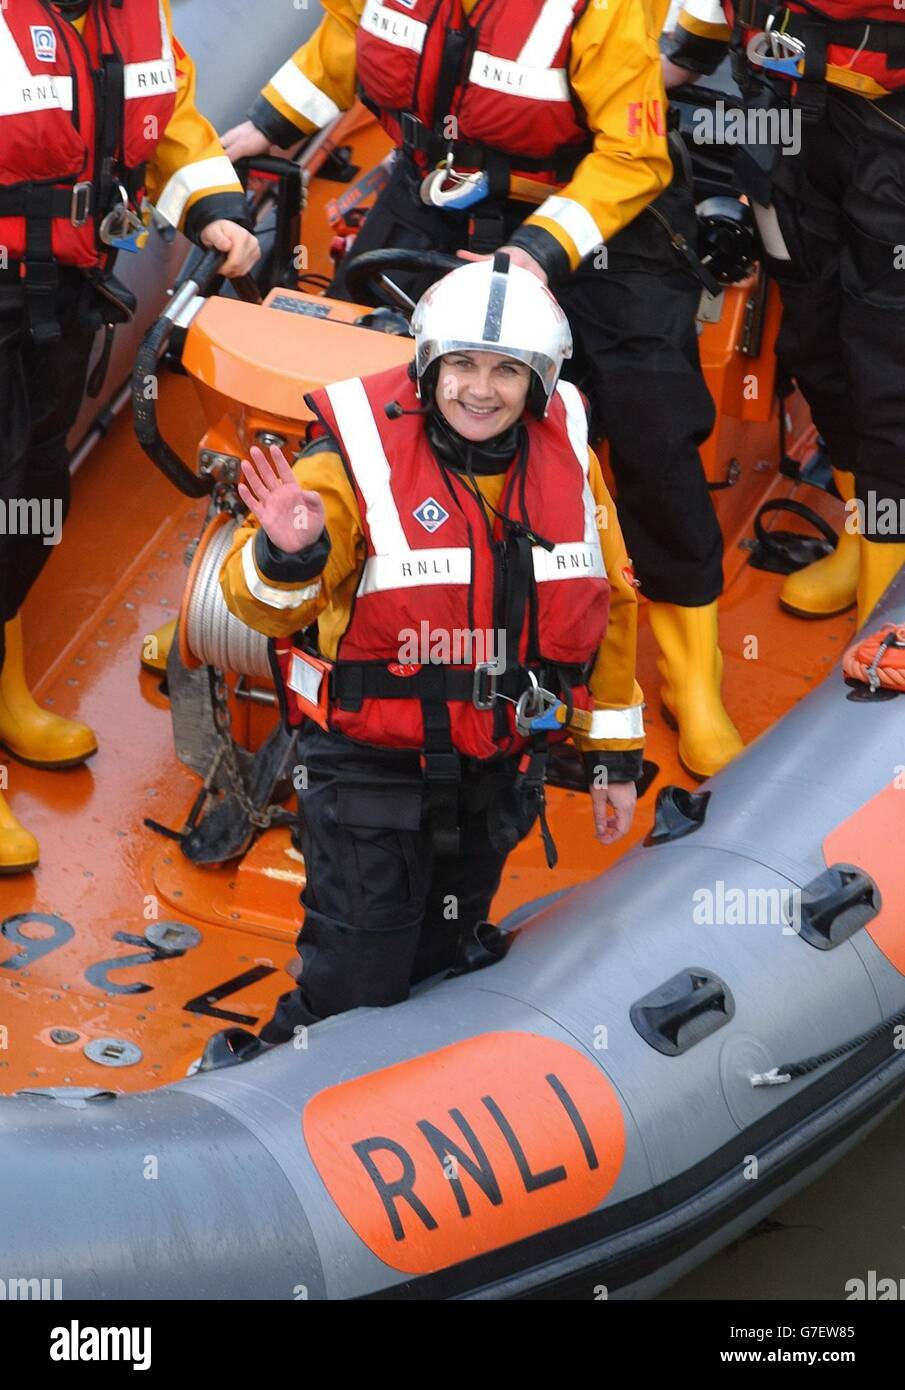 RNLI Lifeboat woman Aileen Jones on board a lifeboat at Porthcawl, South Wales, who is to become the first female in 116 years to receive a bravery award. Aileen, helmsman of the RNLI's Porthcawl lifeboat led a team who braved gale force winds and rough sees in August to save a skipper and injured fisherman. Stock Photo